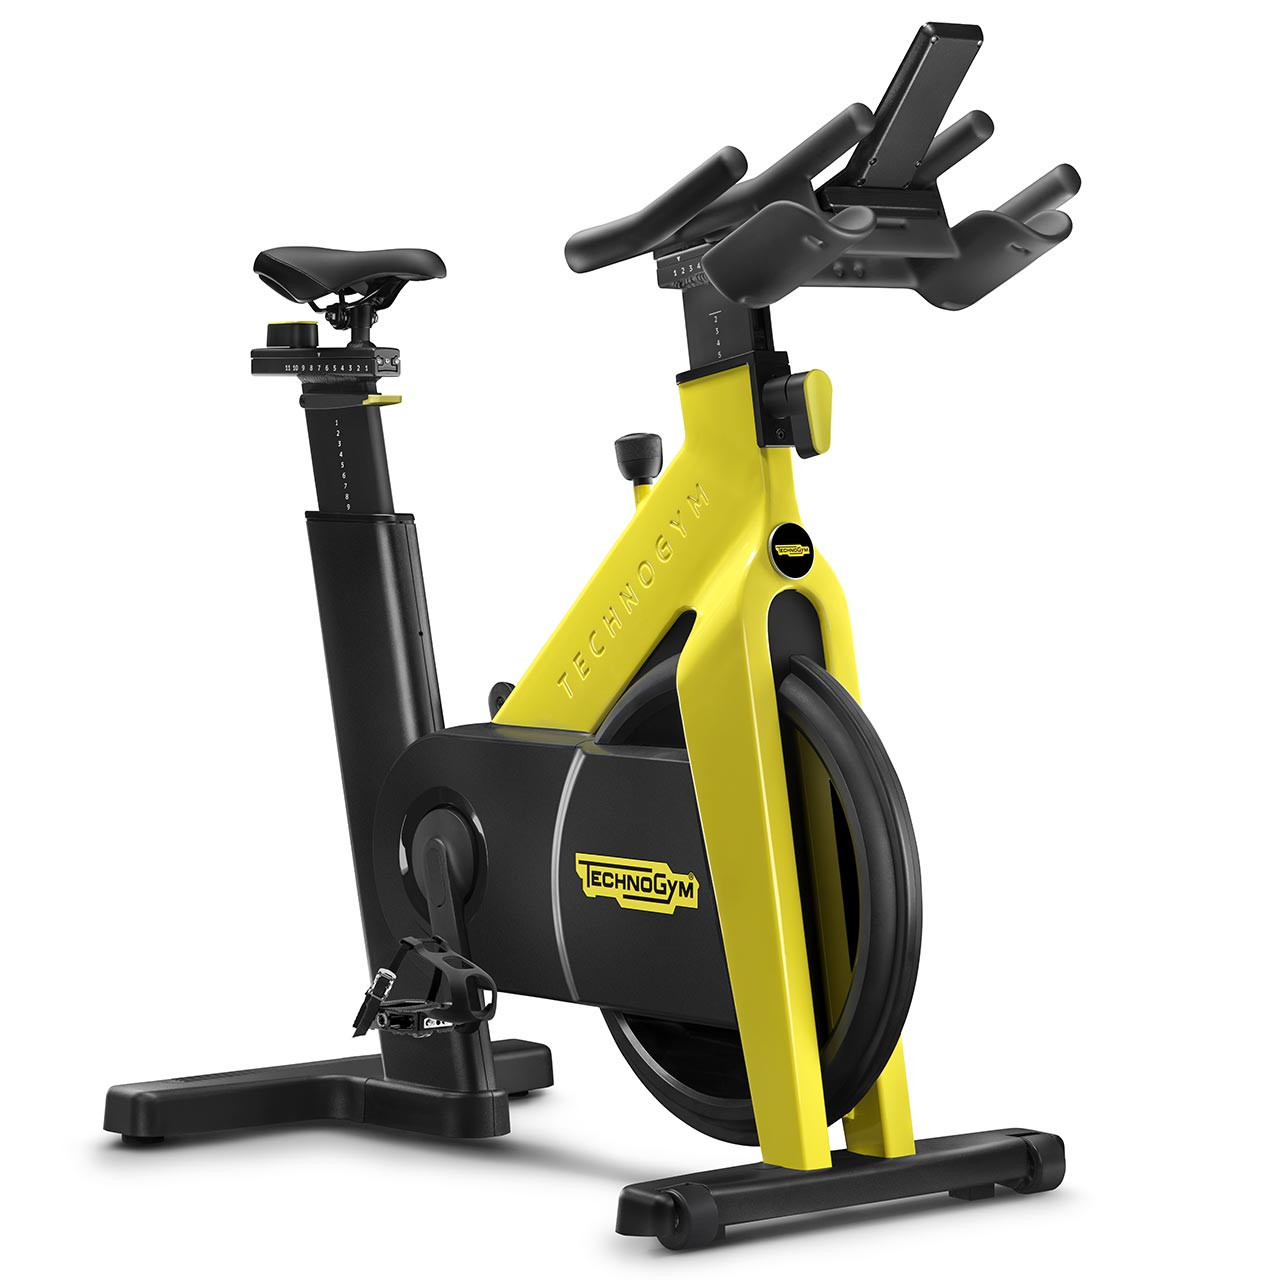 Group Cycle Connect -Technogym Group Cycle